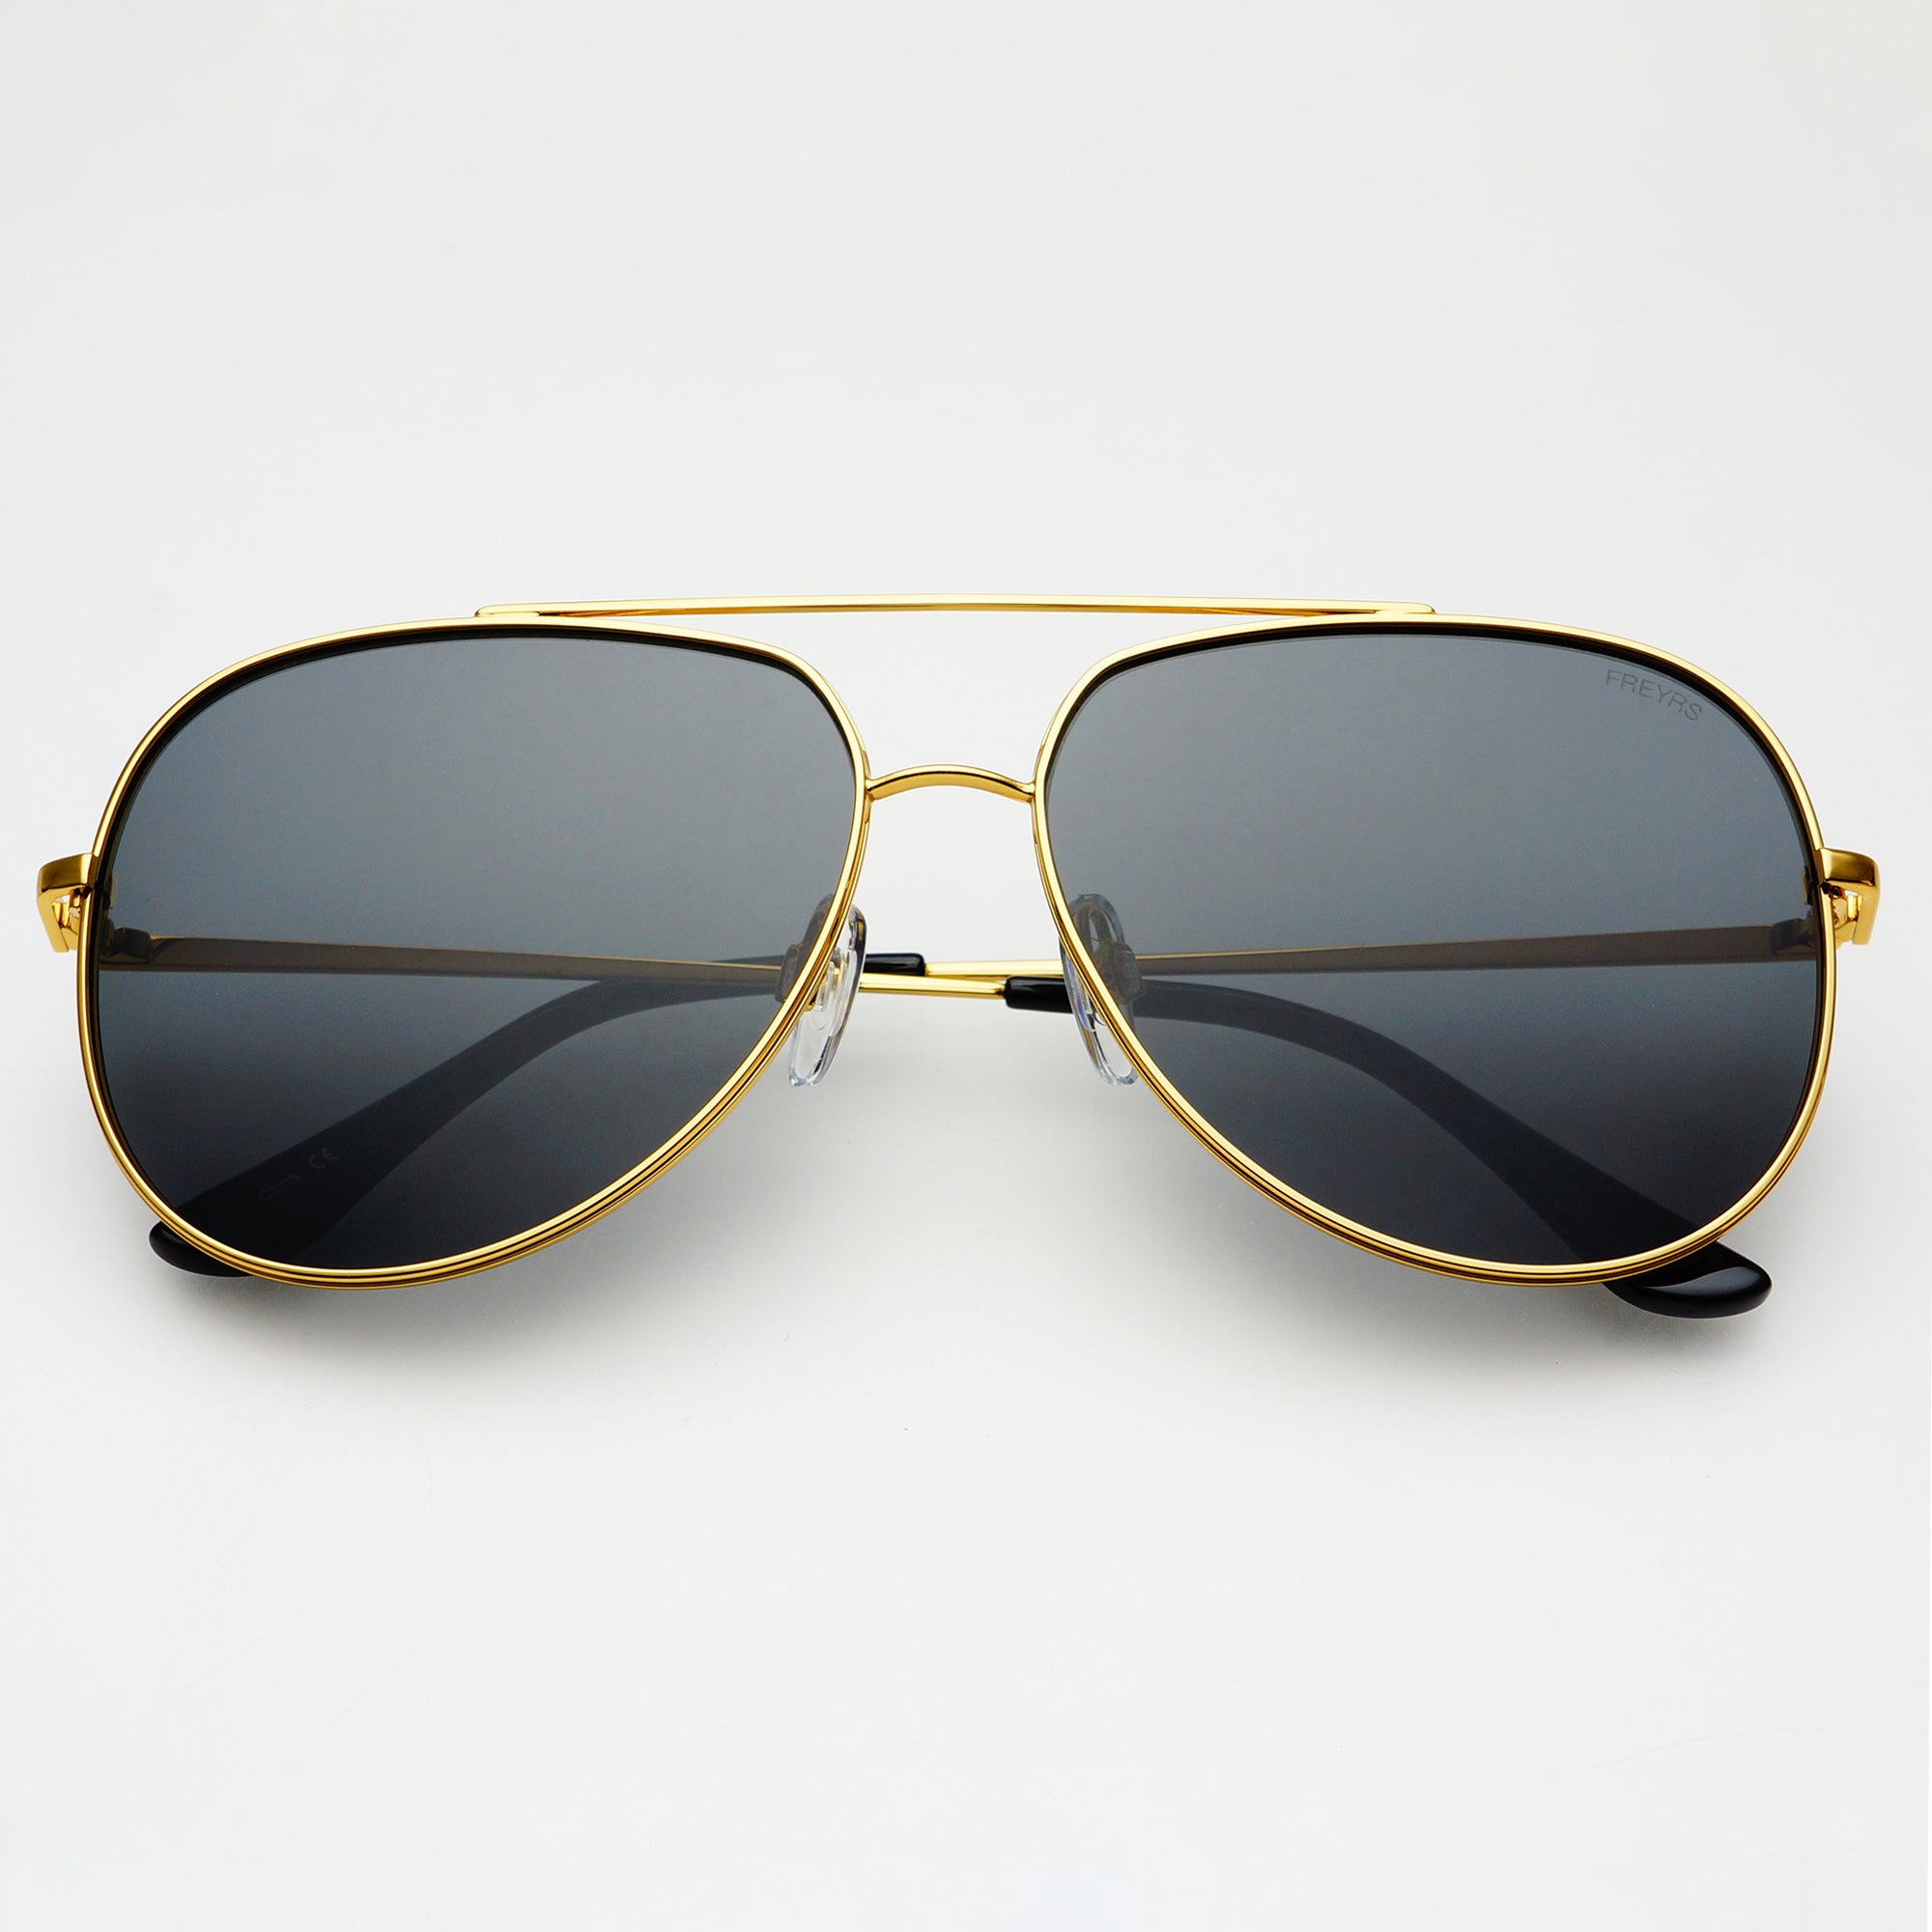 Large Polarized Sunglasses For Men And Women Designer Fashion With 6  Options, Good Quality 349q From Rytew, $17.23